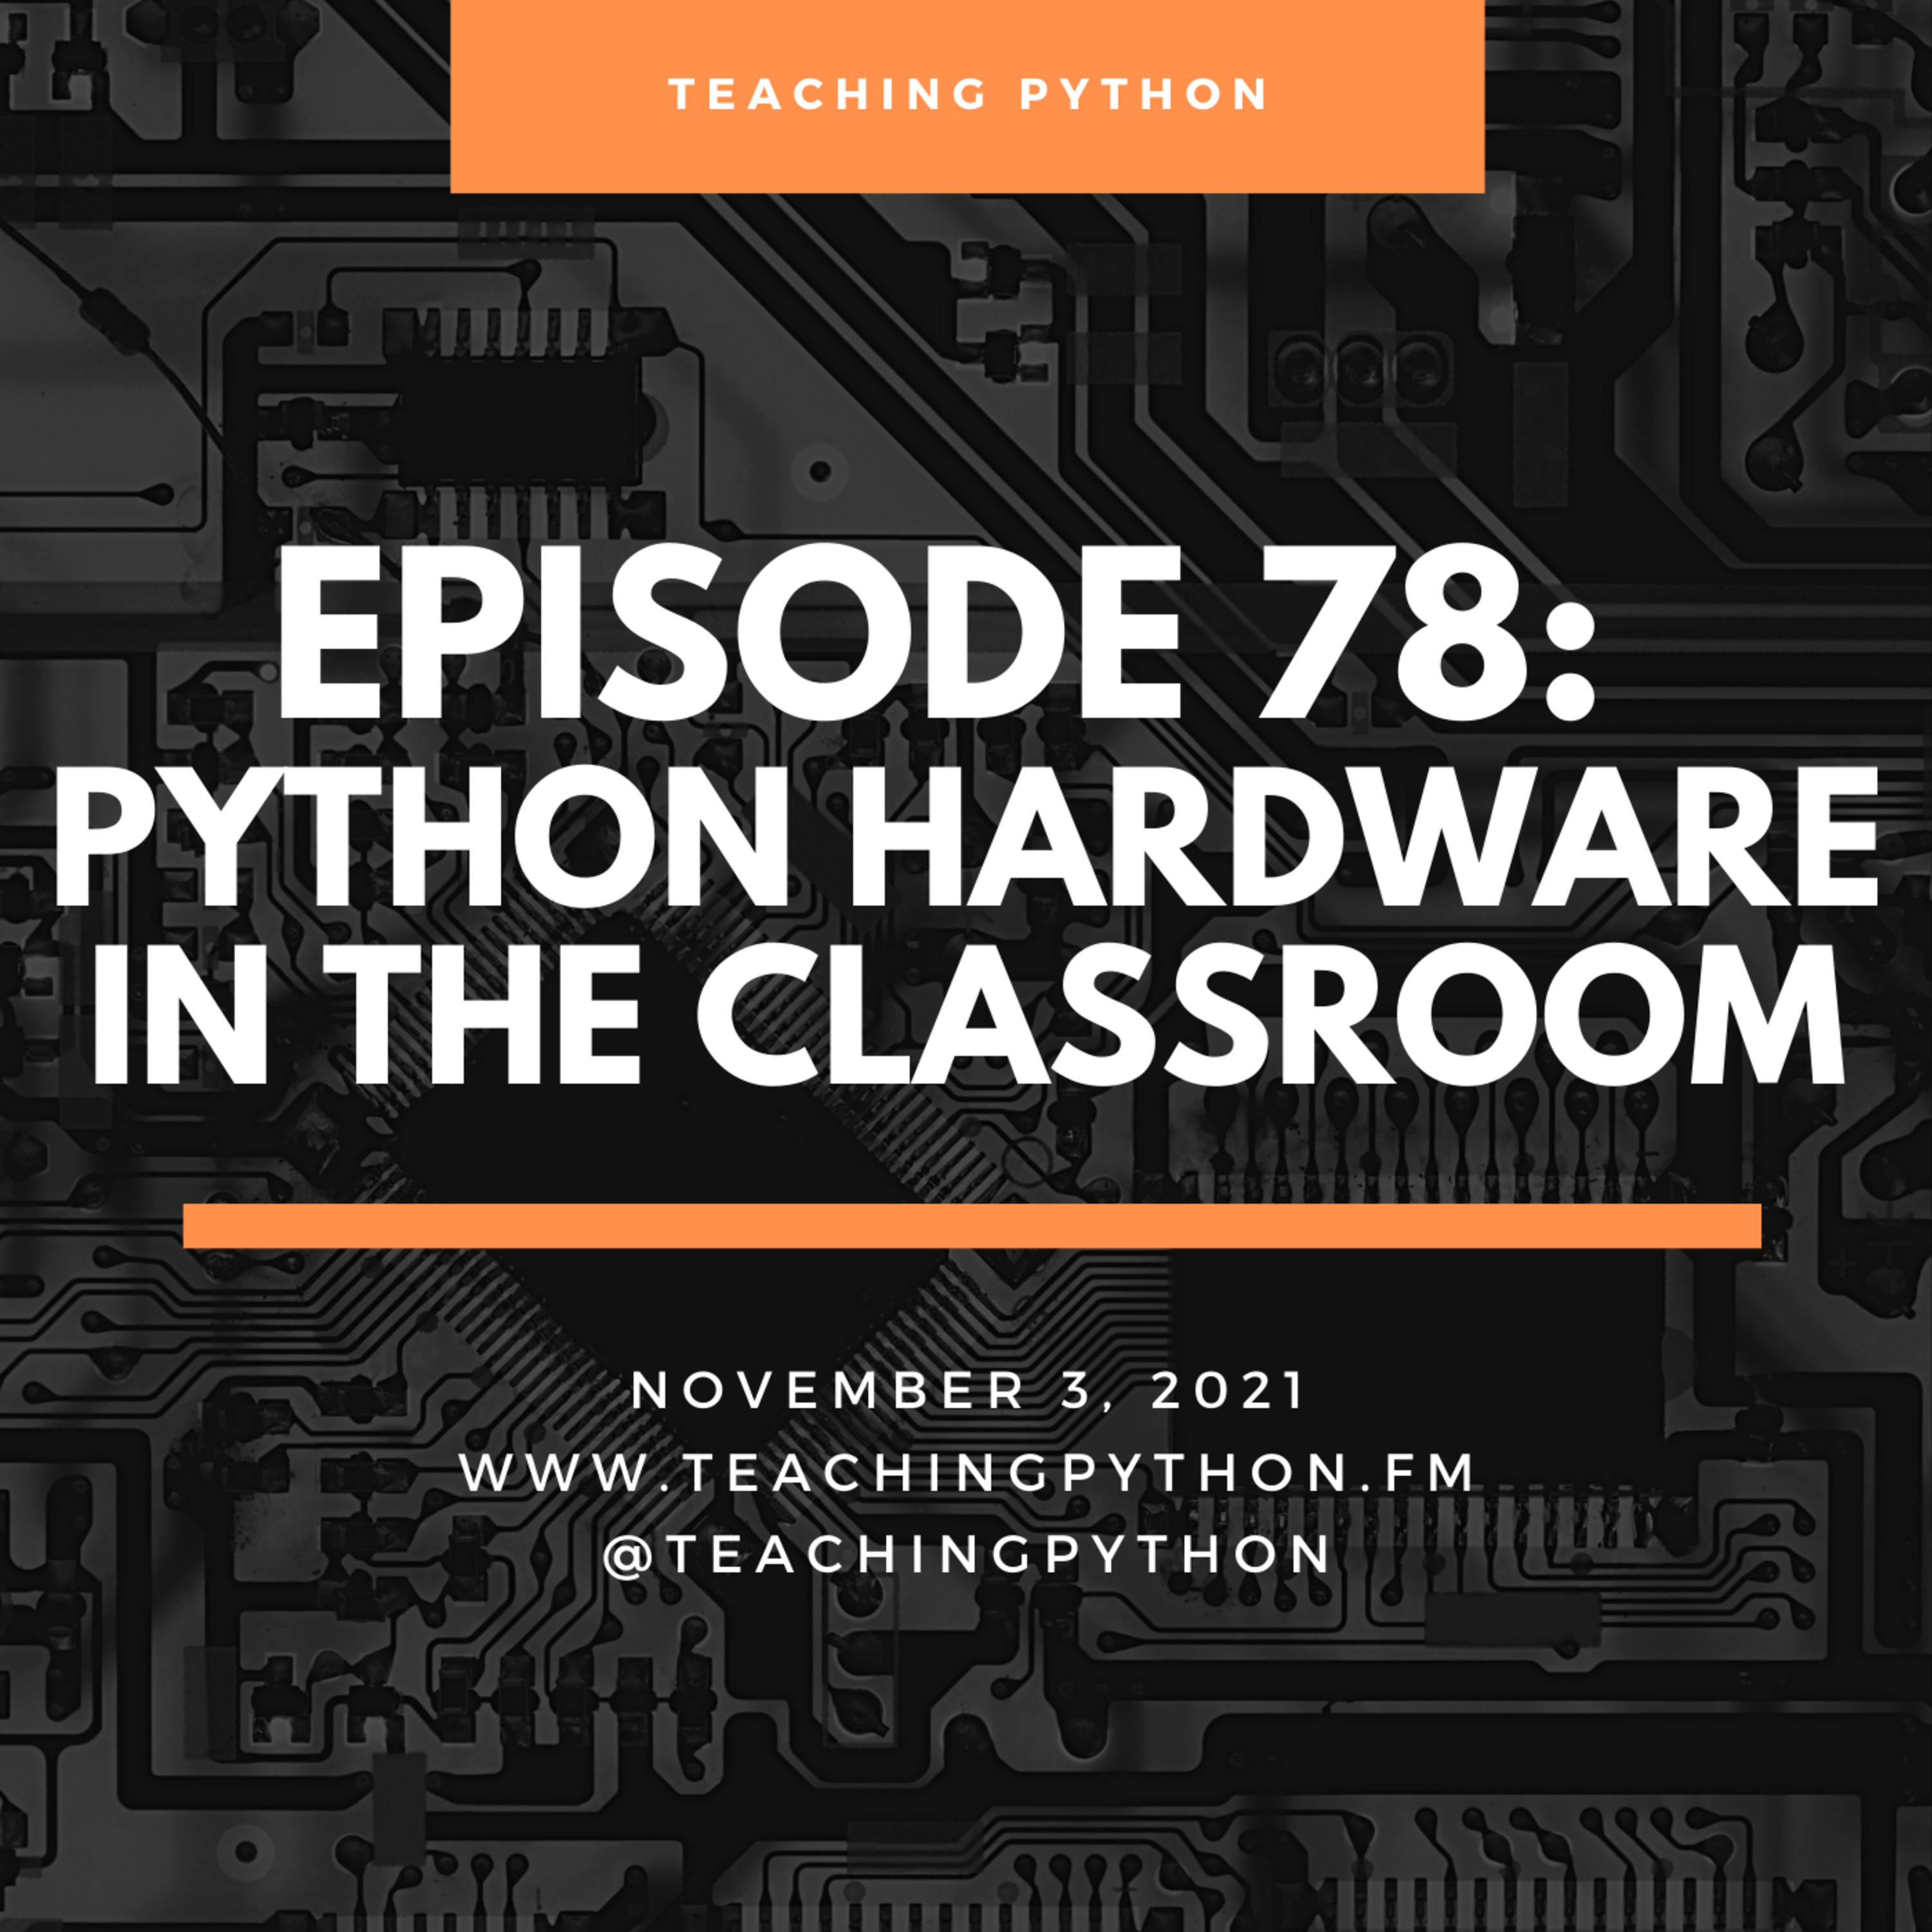 Episode 78: Python Hardware in the Classroom